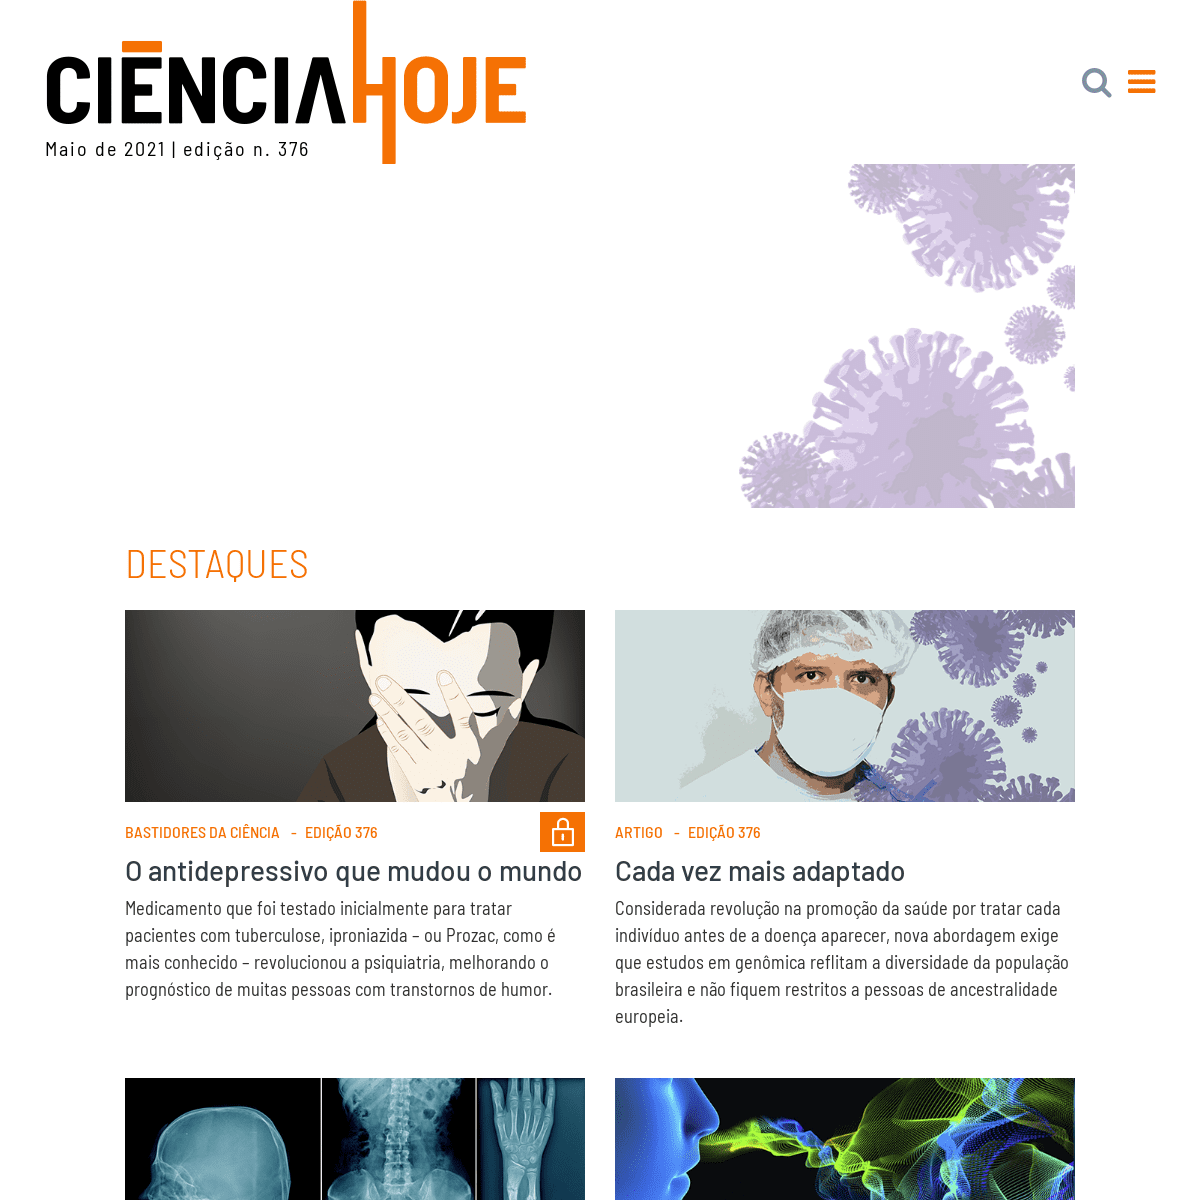 A complete backup of https://cienciahoje.org.br